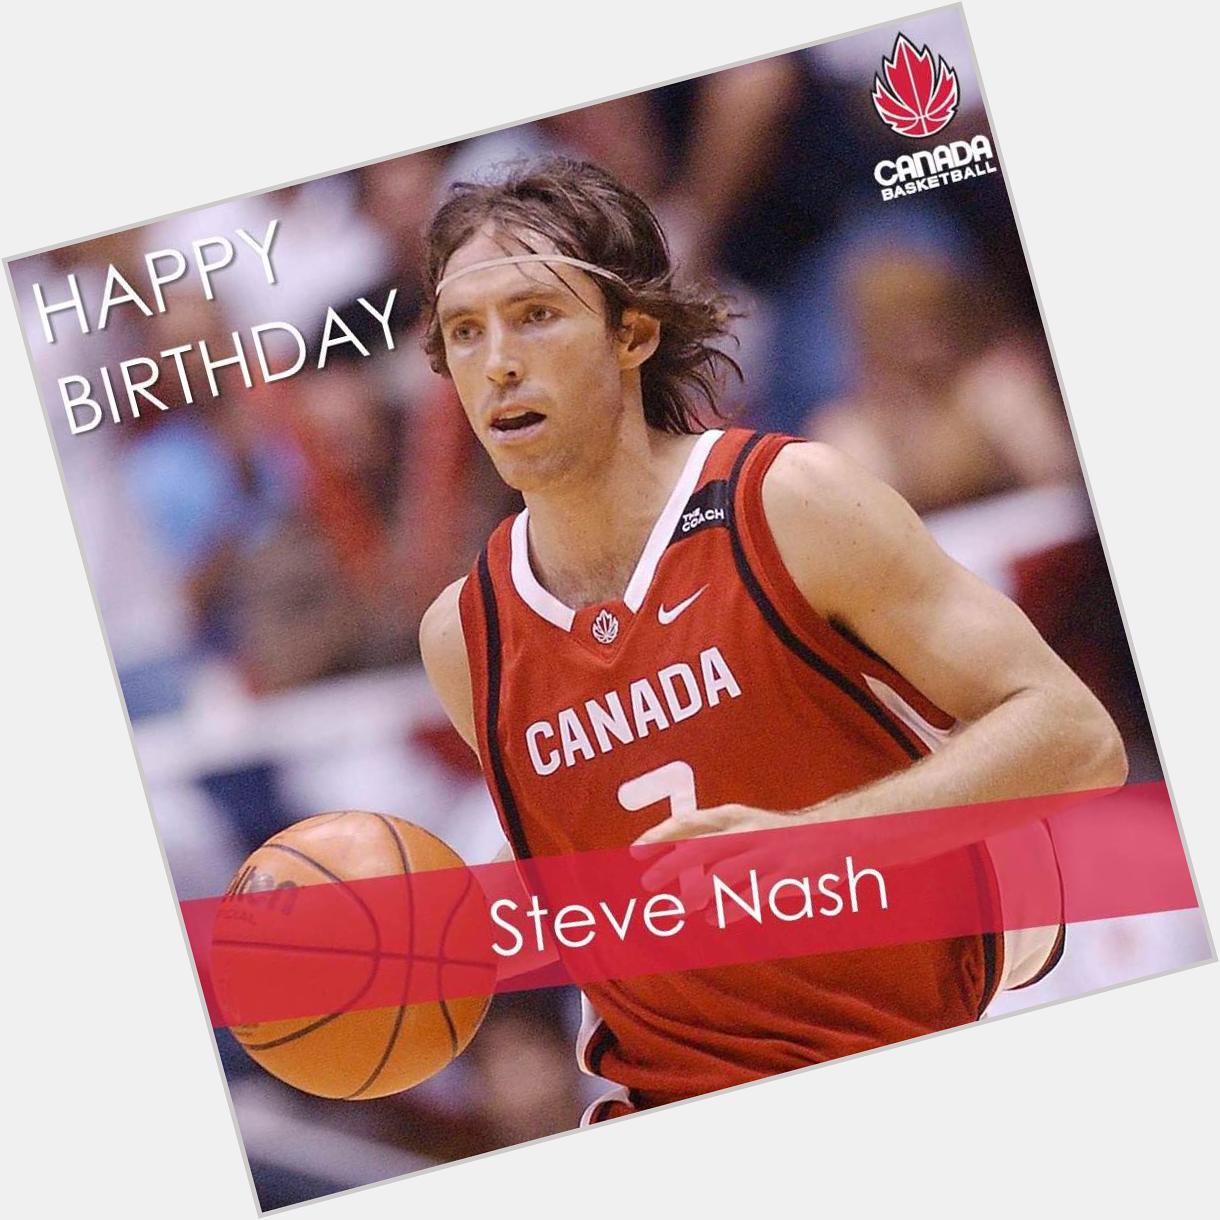 Happy Steve Nash Day y\all!  Wishing our GM a very happy birthday! 